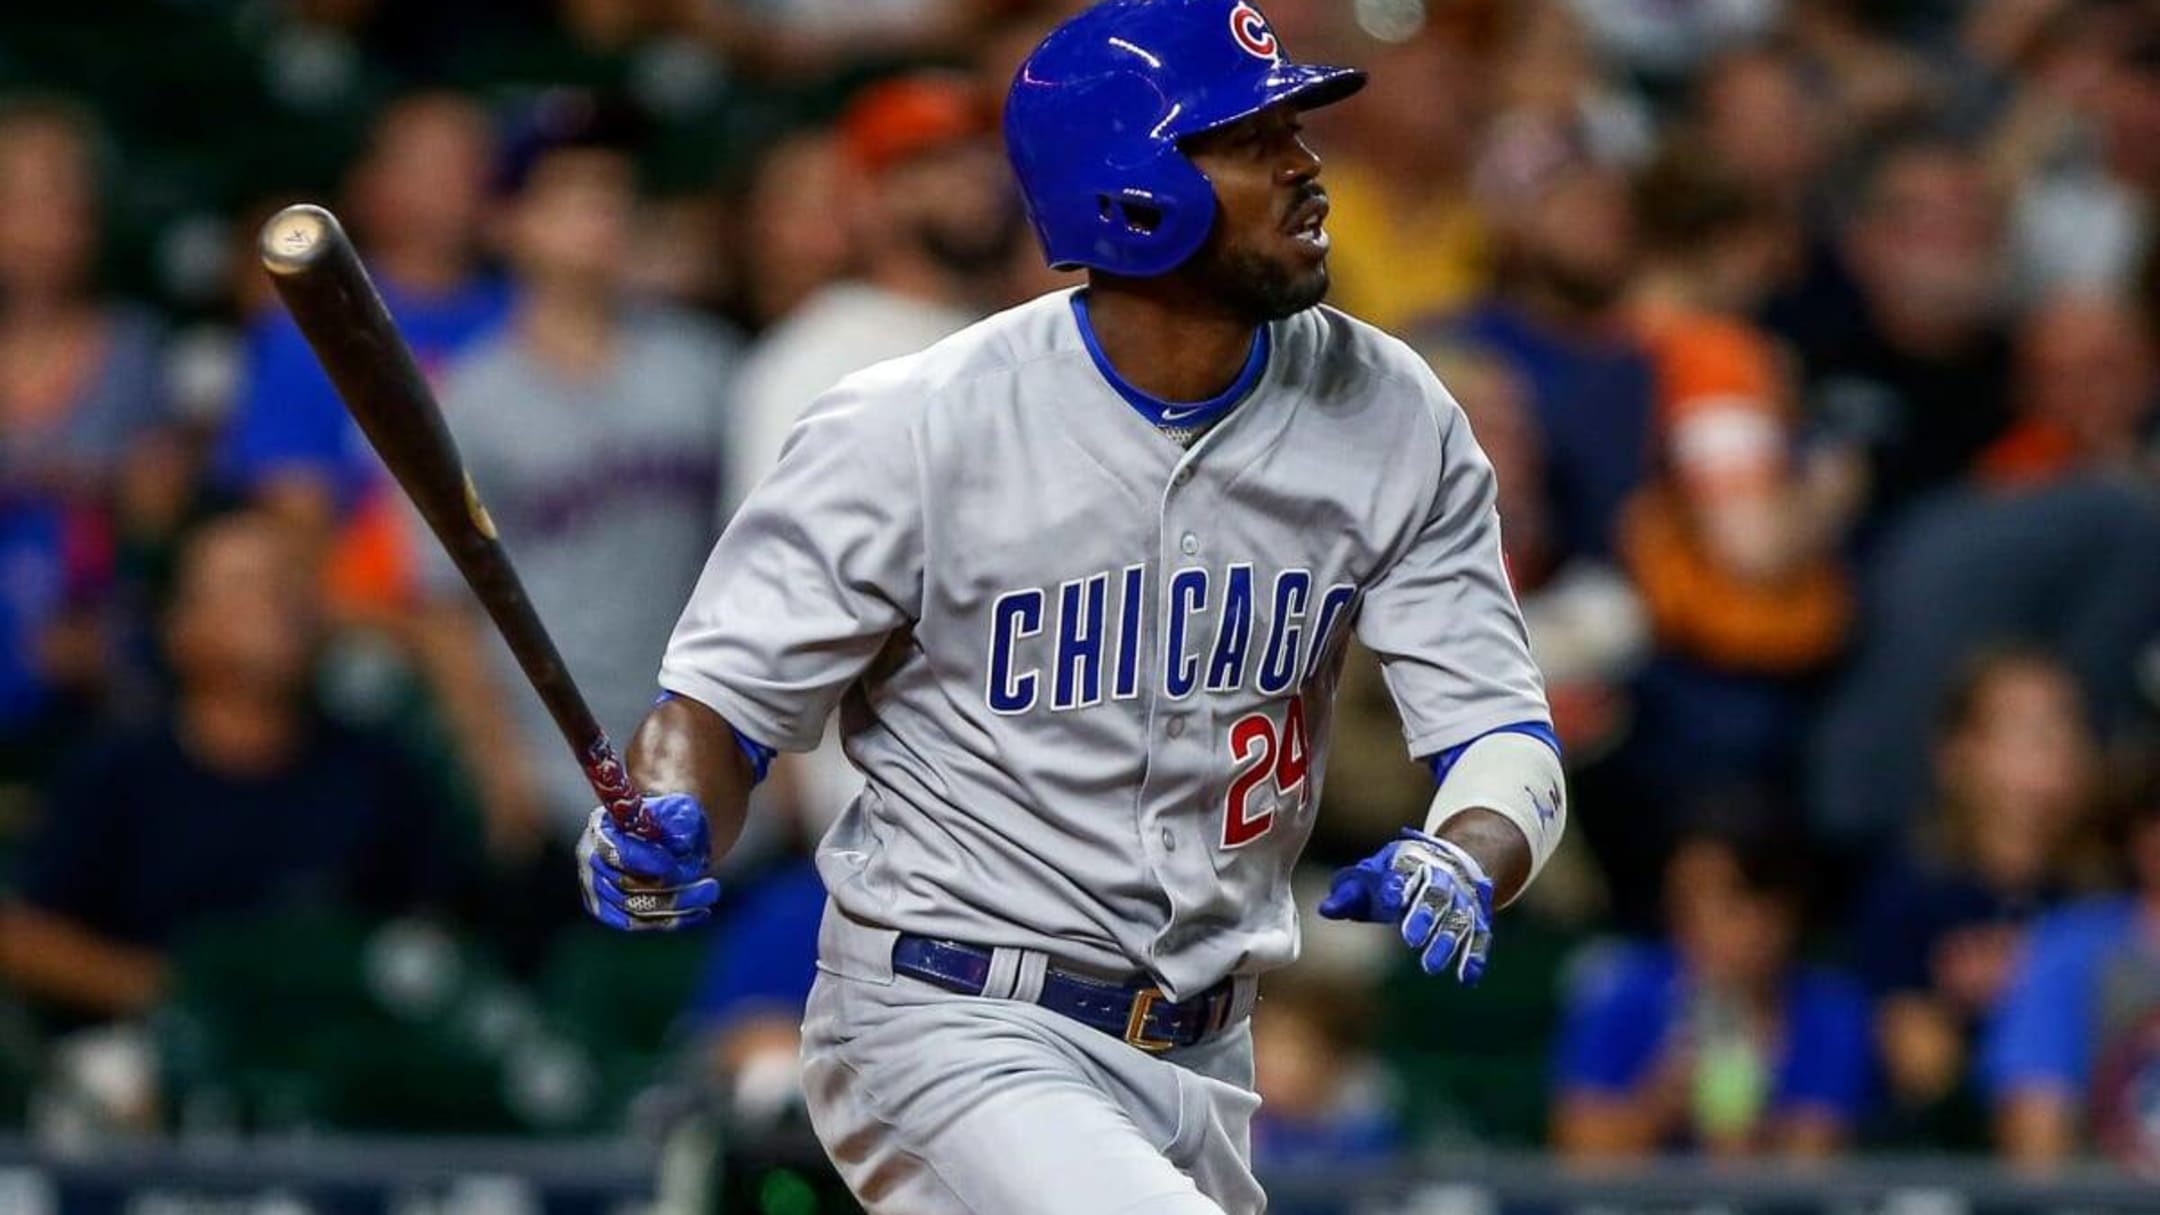 Fox Sports' Dexter Fowler says Astros are Rangers' big brother